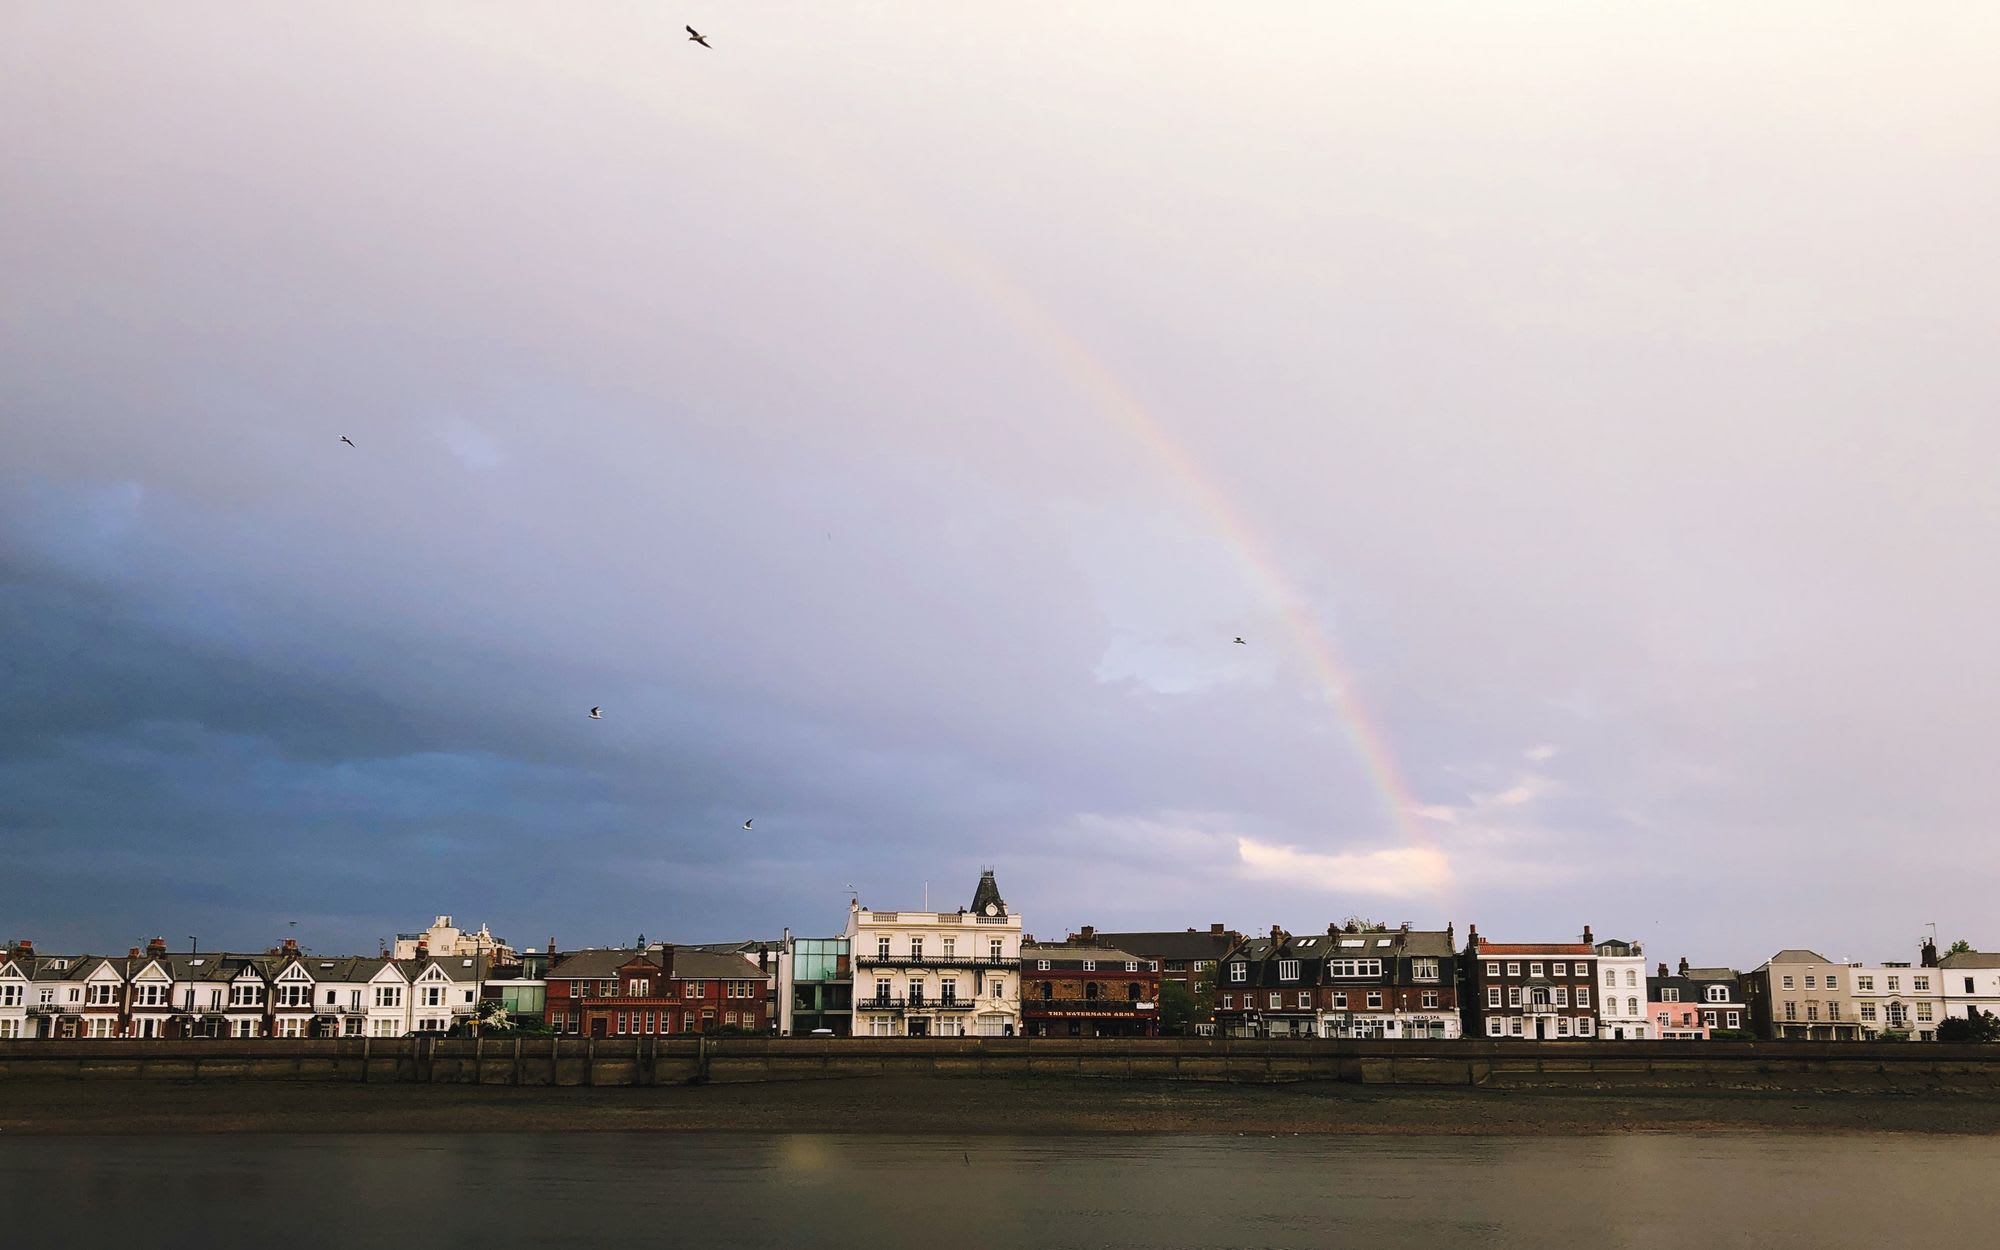 View of the River Thames at Barnes in London with a rainbow and birds in the sky after some rain